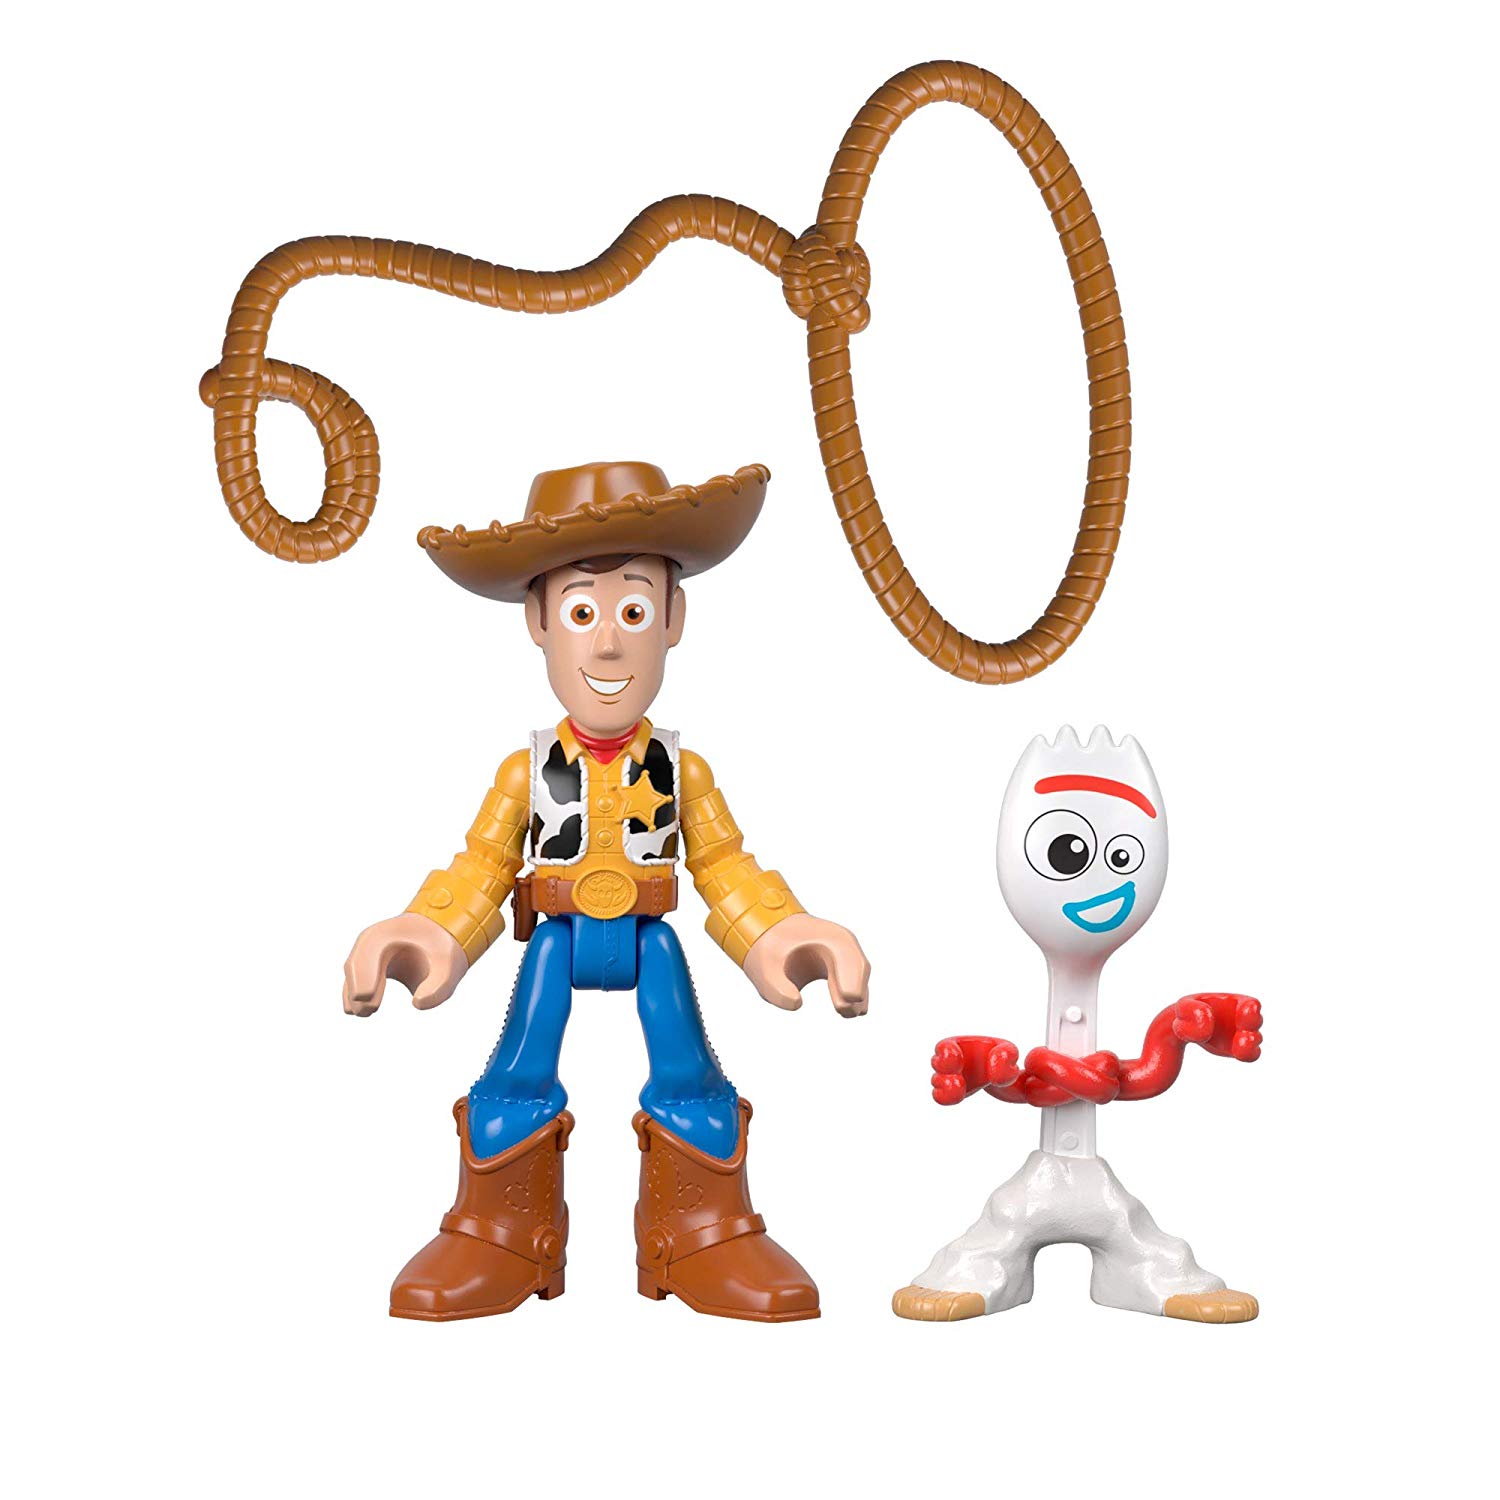 Fisher-Price Gbg90 Imaginext Disney Pixar Toy Story 4 Forky And Woody Toys 